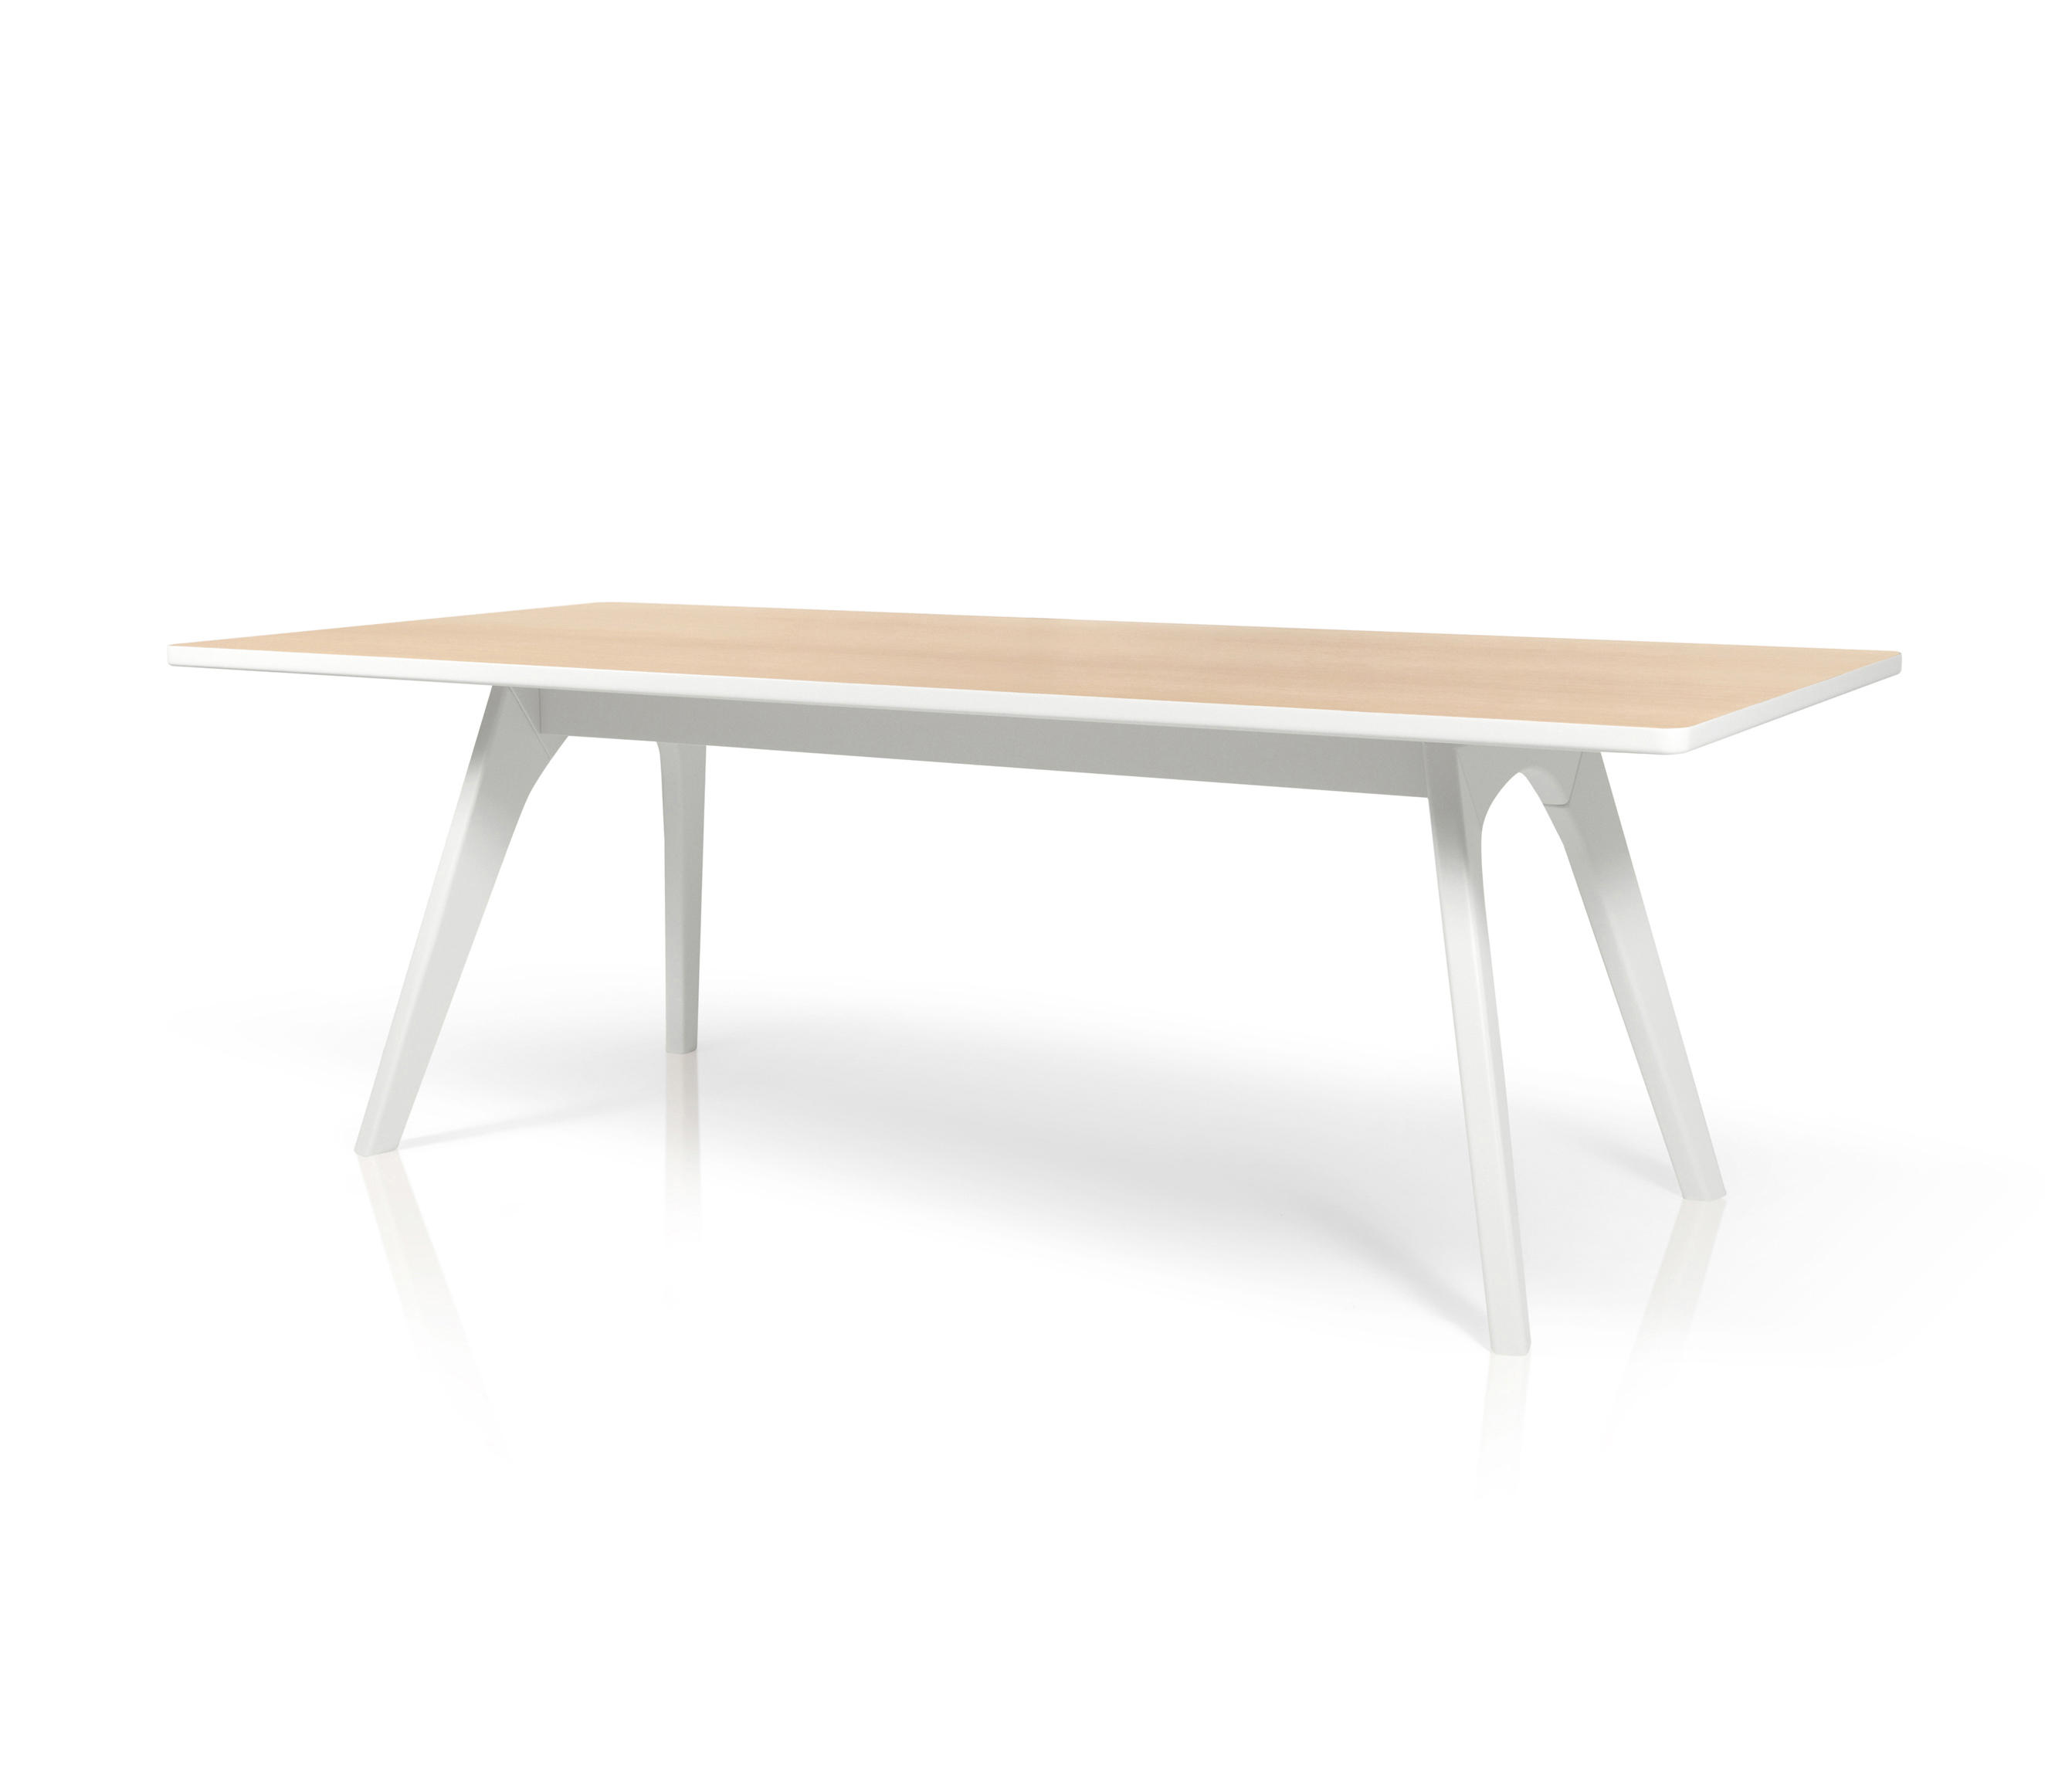 BO-EM 002 - Dining tables from al2 | Architonic